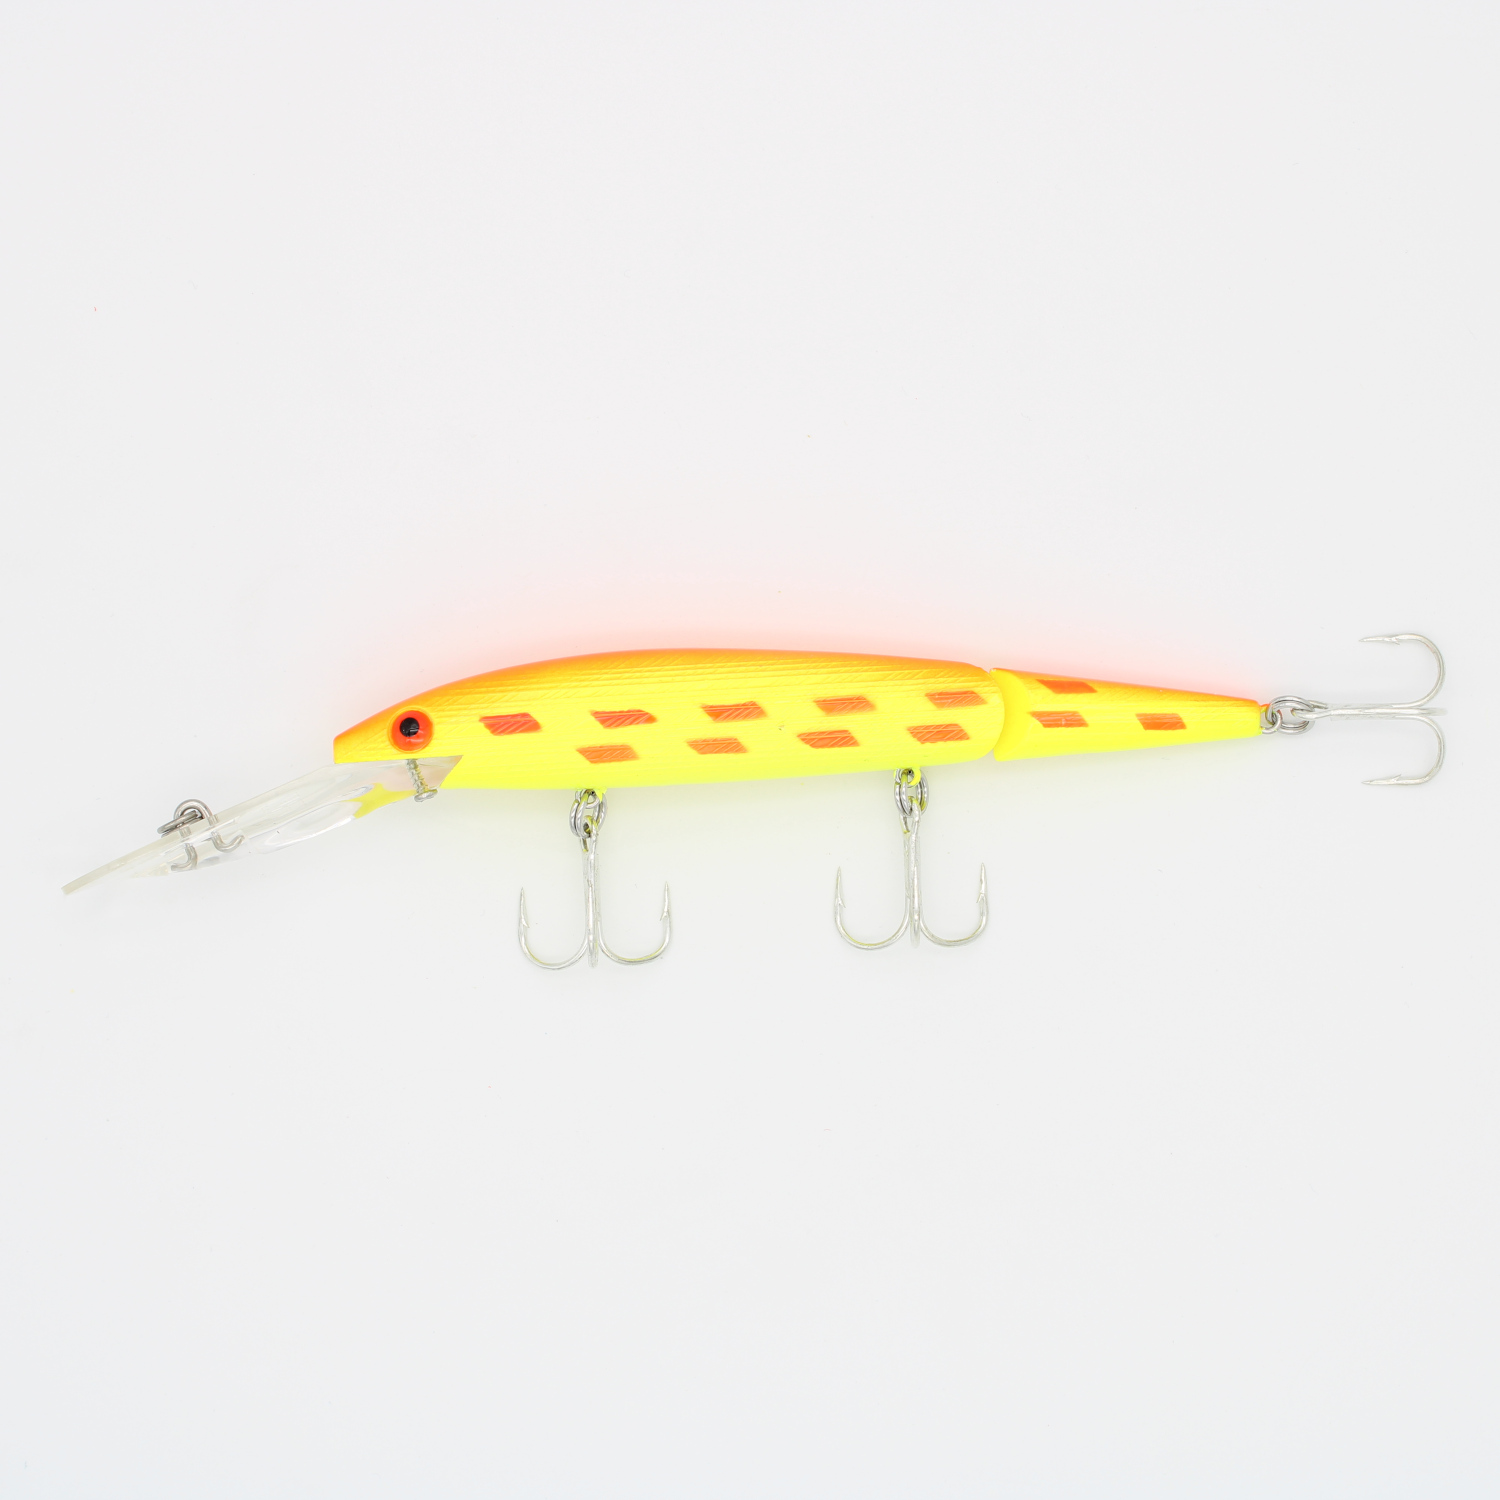 Rebel Ghost Minnow, 1/8oz Brown Trout fishing lure #11782